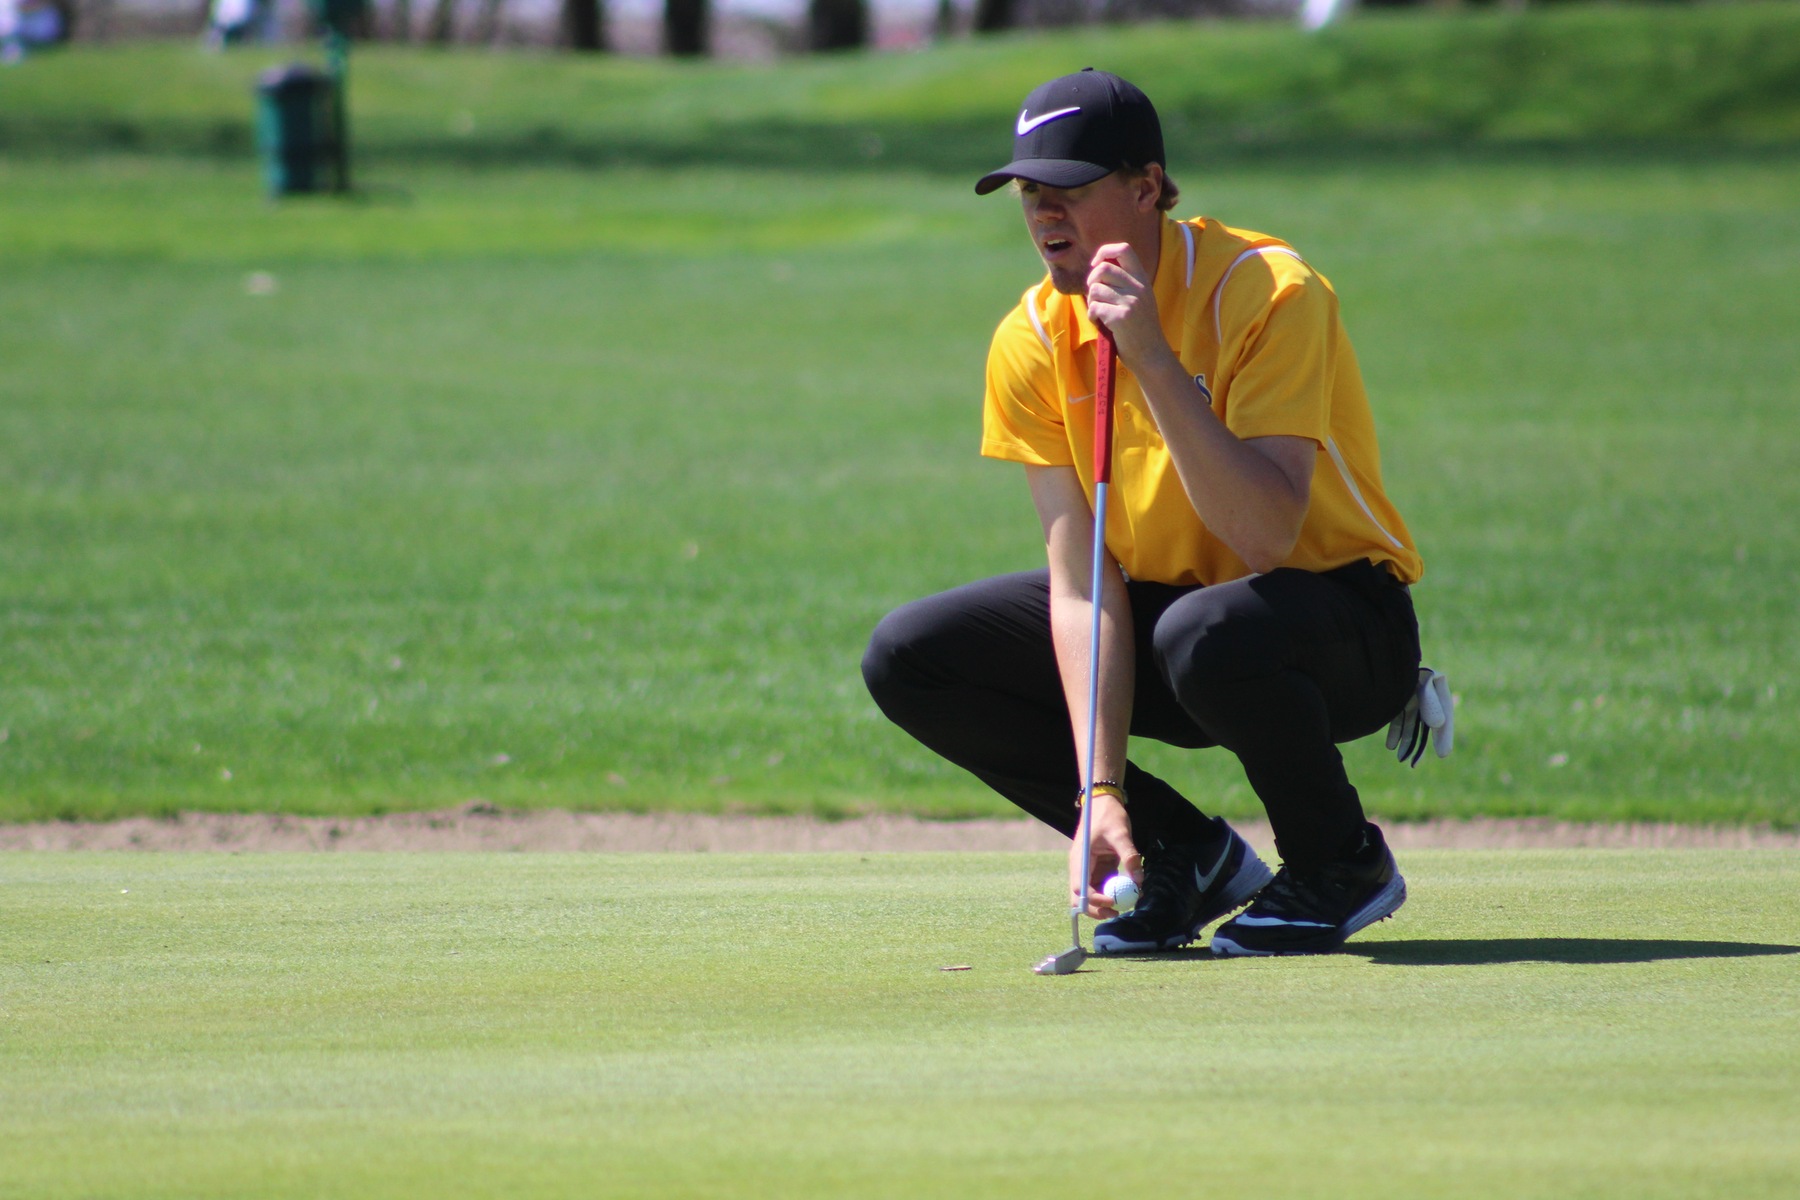 Joe Nordquist lines up a putt at the NIACC Invitational on Monday at the Mason City Country Club.